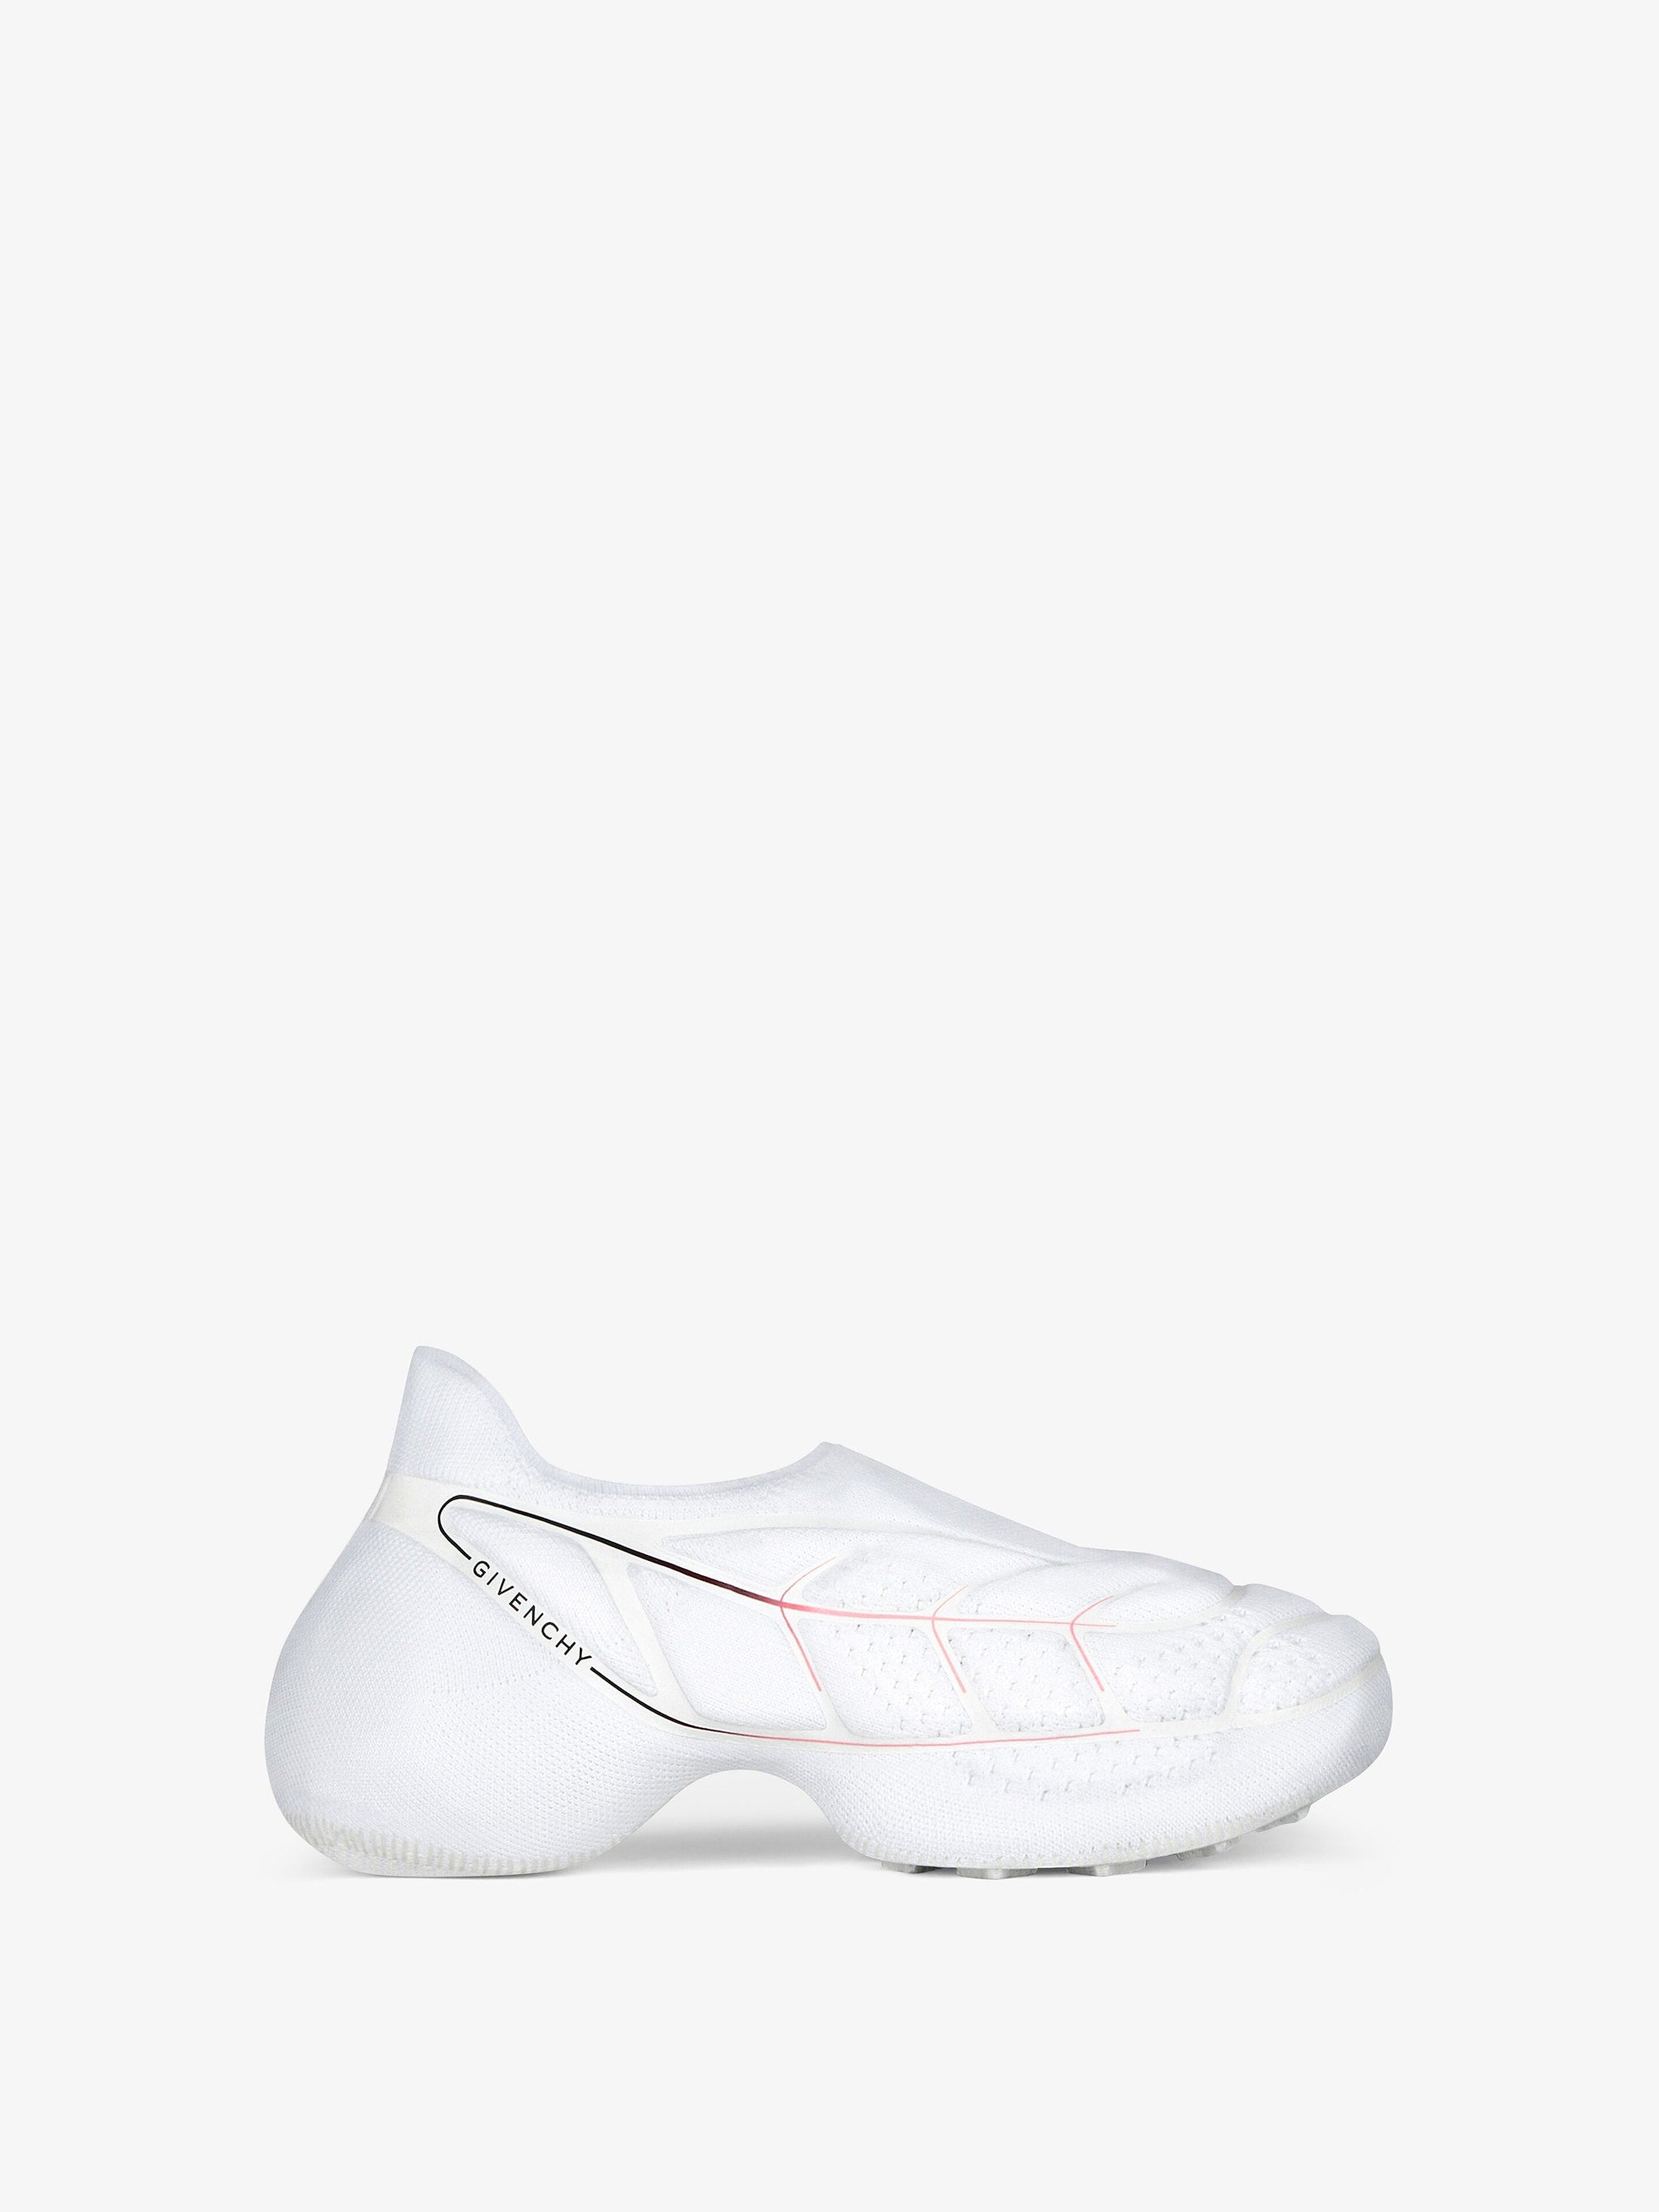 Givenchy TK-360 Sneakers In Wesh White / Pink